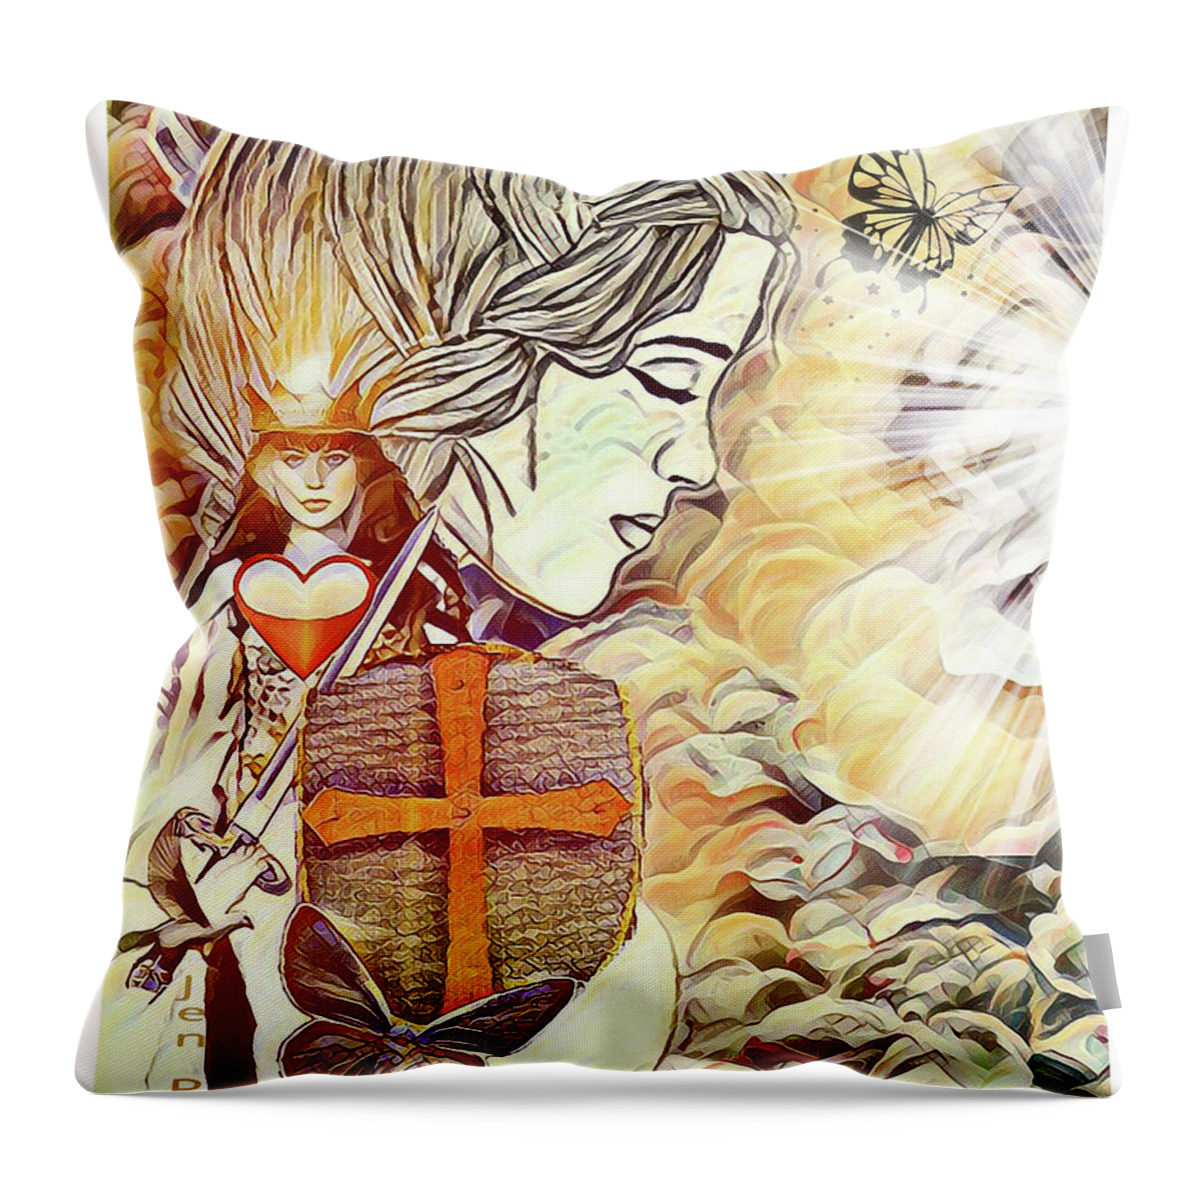 Jennifer Page Throw Pillow featuring the digital art Humble Warrior by Jennifer Page